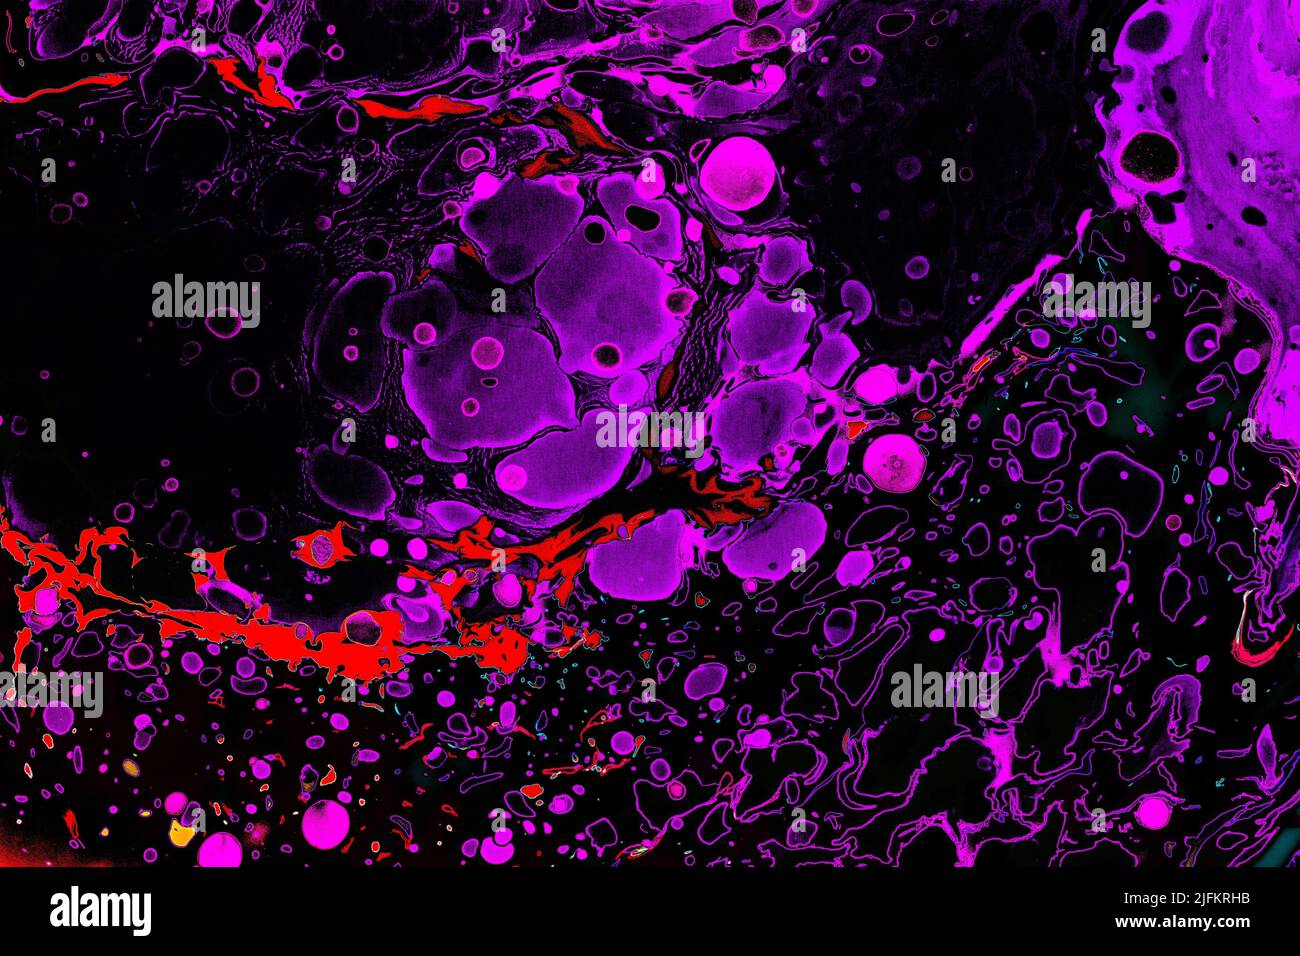 Abstract marbling art patterns as background. Stock Photo